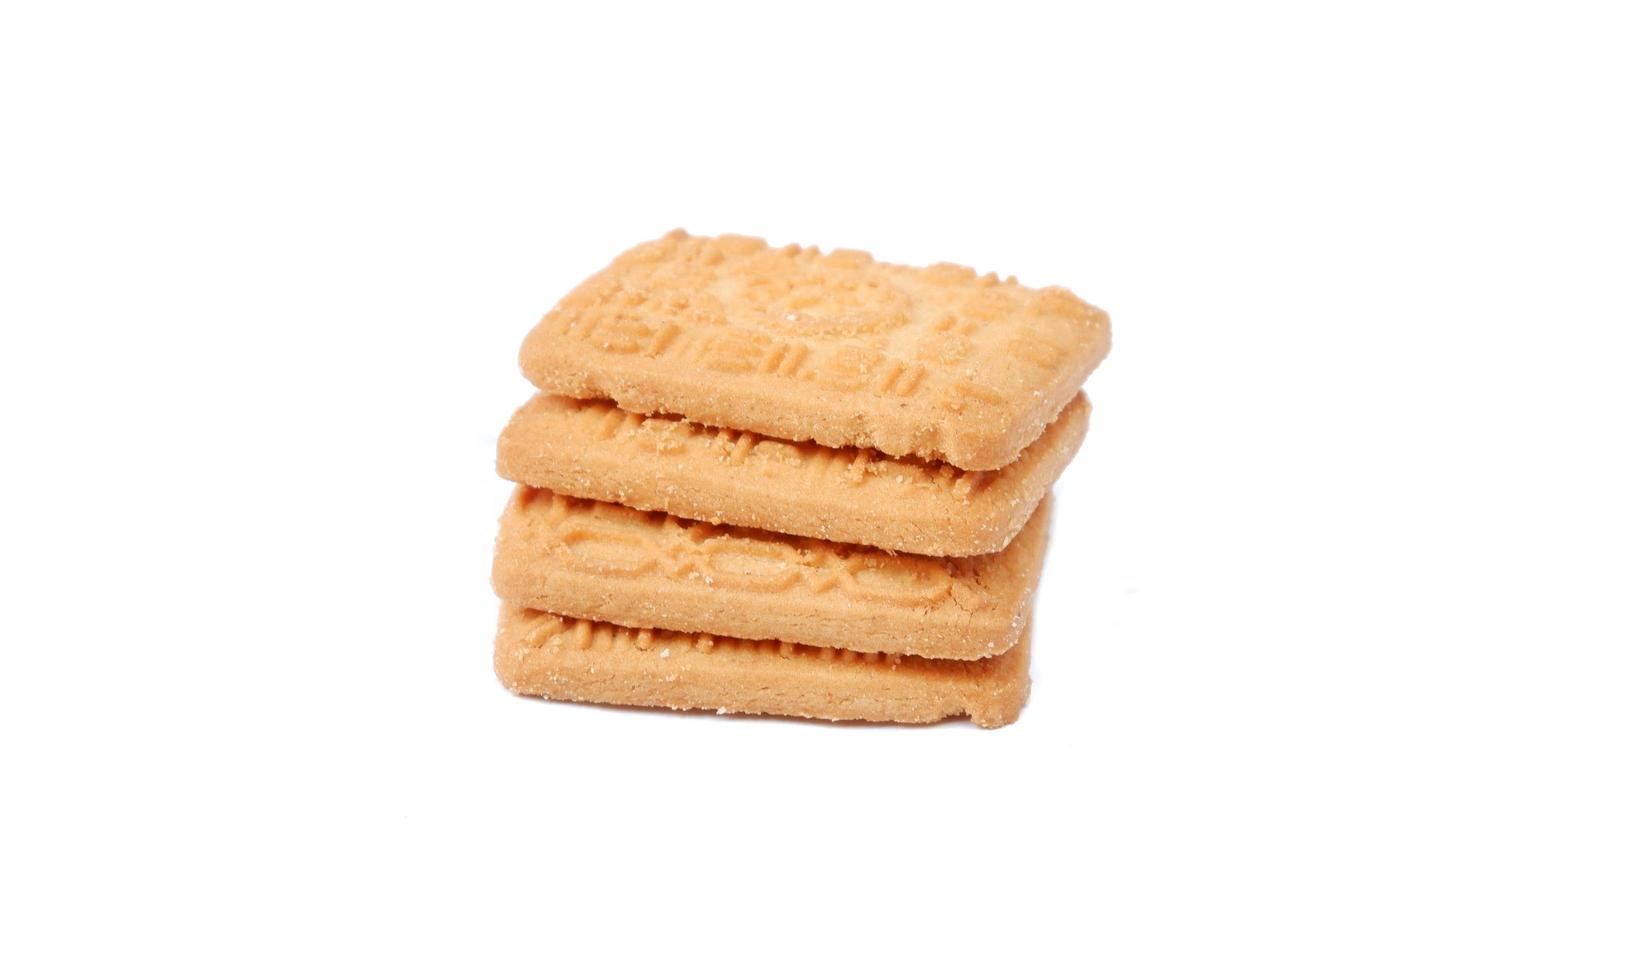 Biscuit isolated on a white background photo